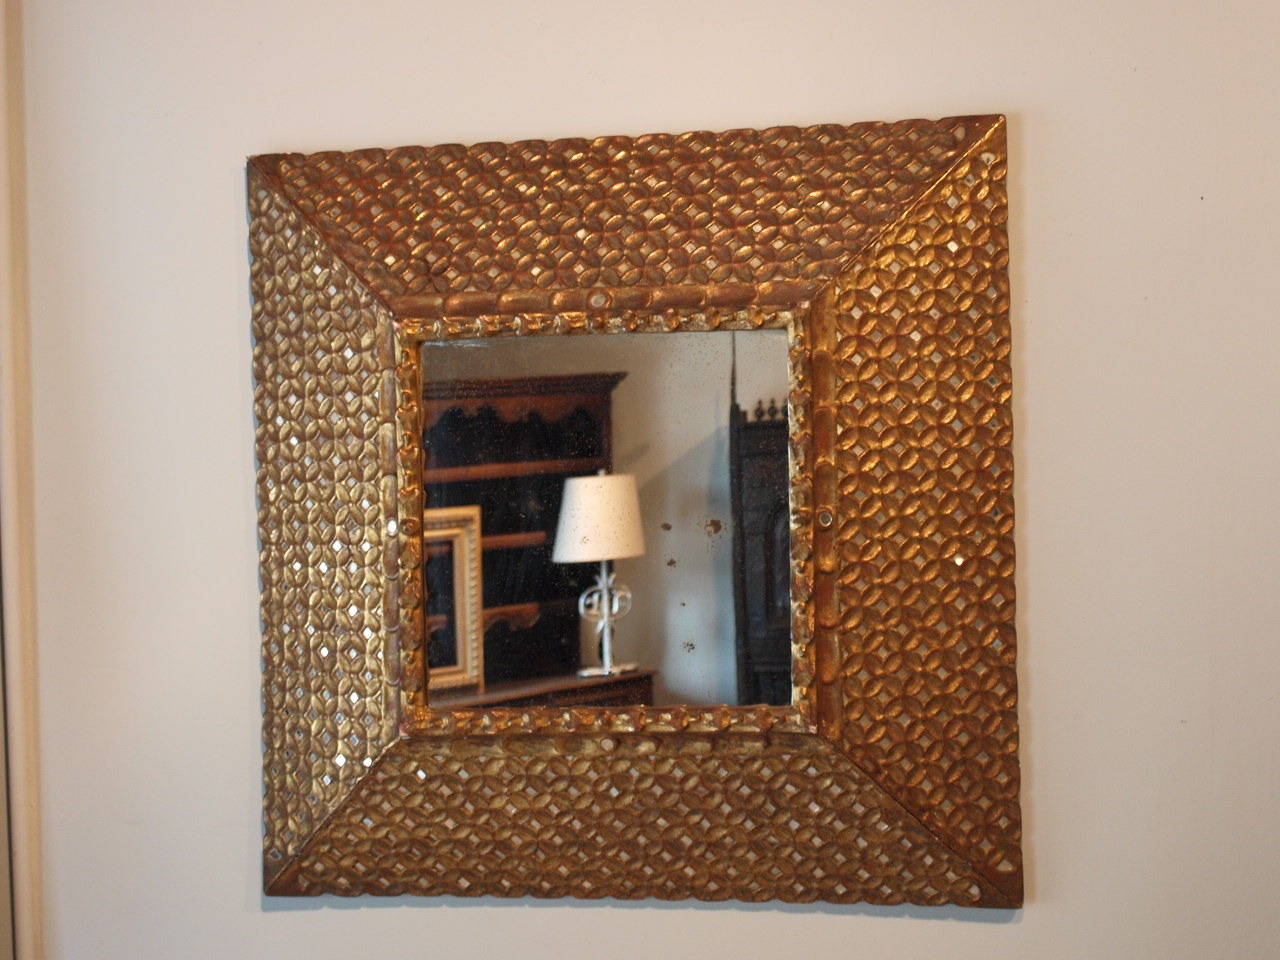 An outstanding later 19th century Spanish Colonial mirror in giltwood.  This mirror is intricately carved and has several hundred hand cut mirror pieces inlaid into the frame.  The gilt is of high quality - worn with time to show traces of the brick